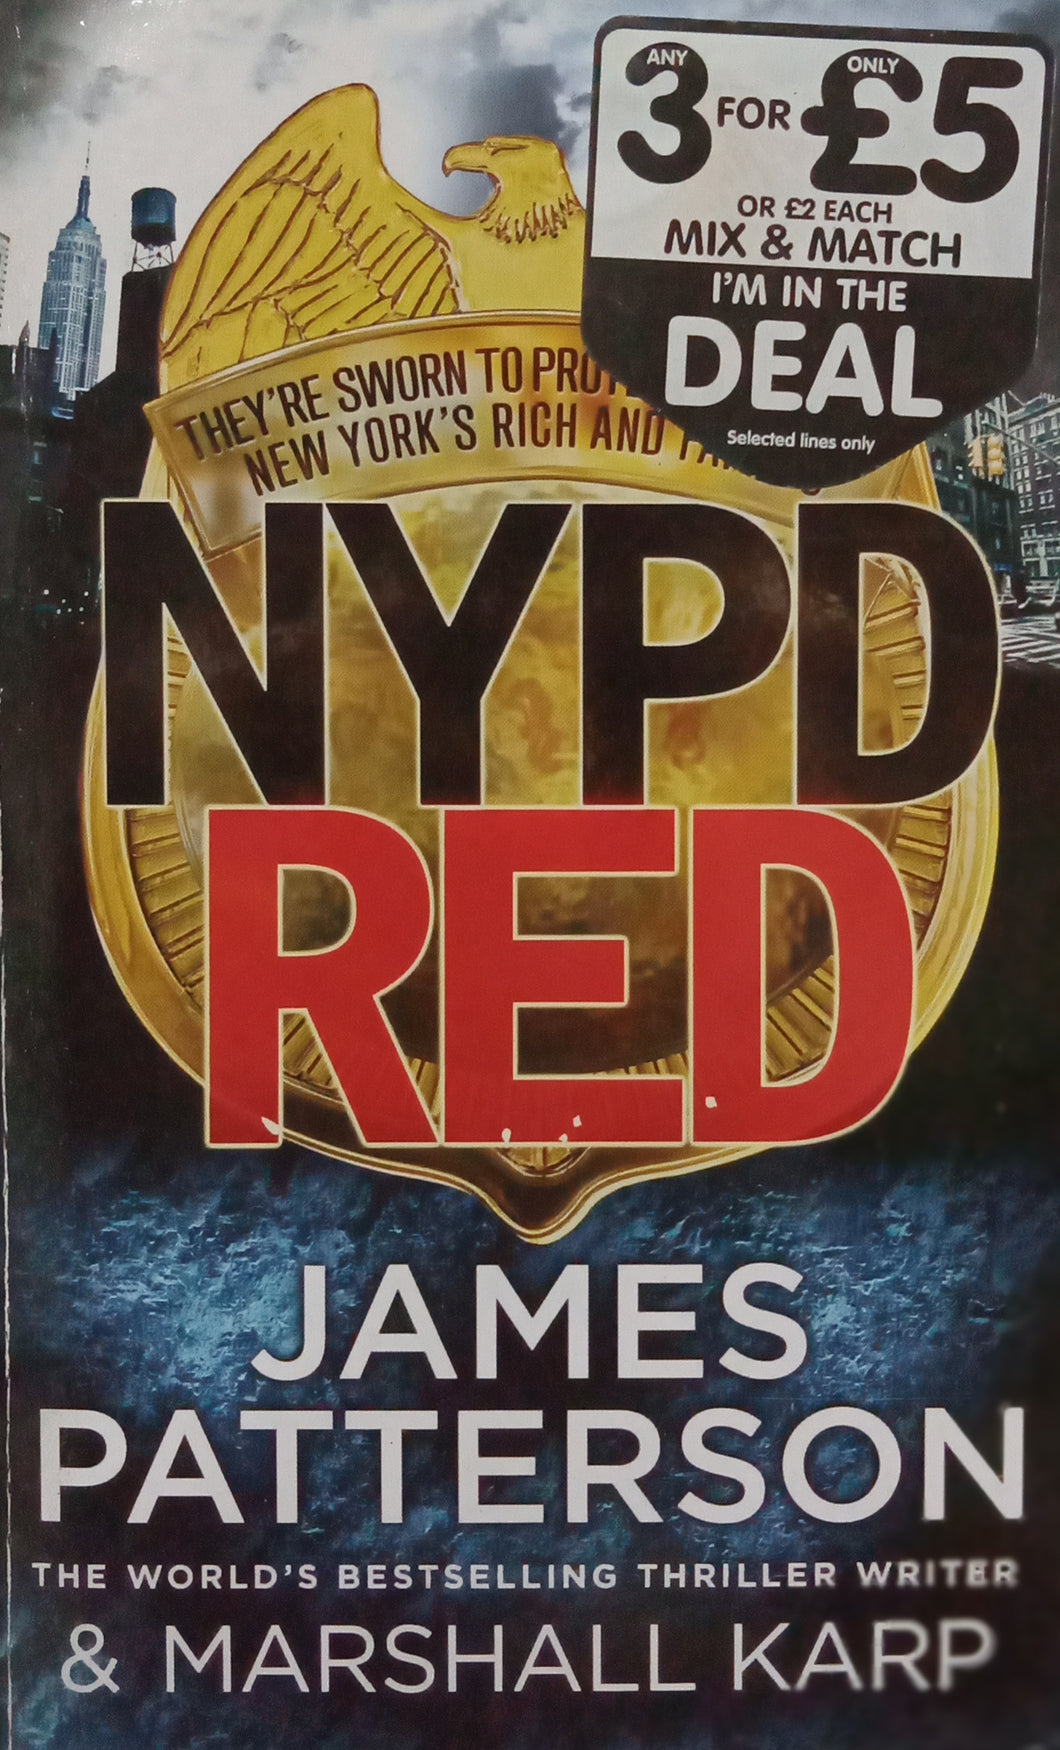 Nypd Red by James Patterson